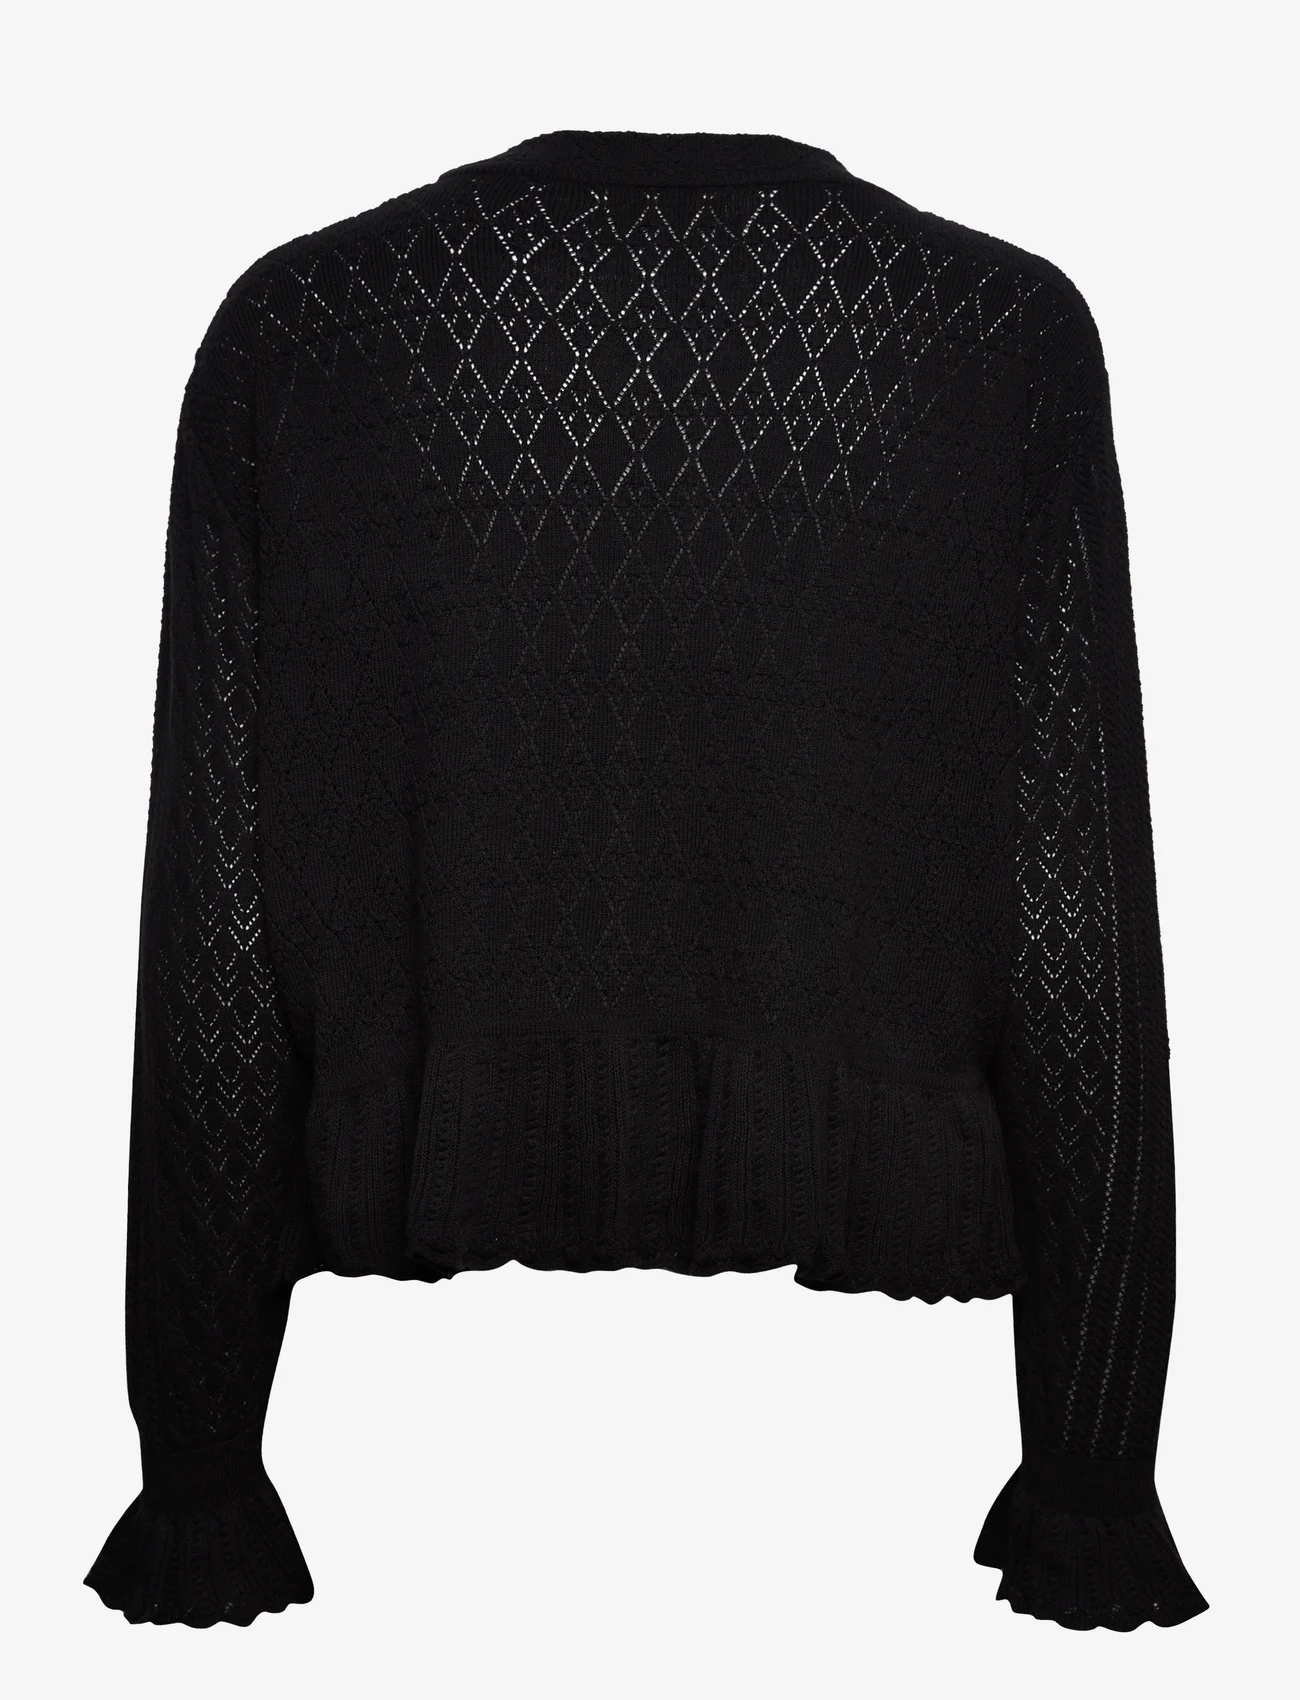 ODD MOLLY - Eden High Neck Sweater - swetry - almost black - 1